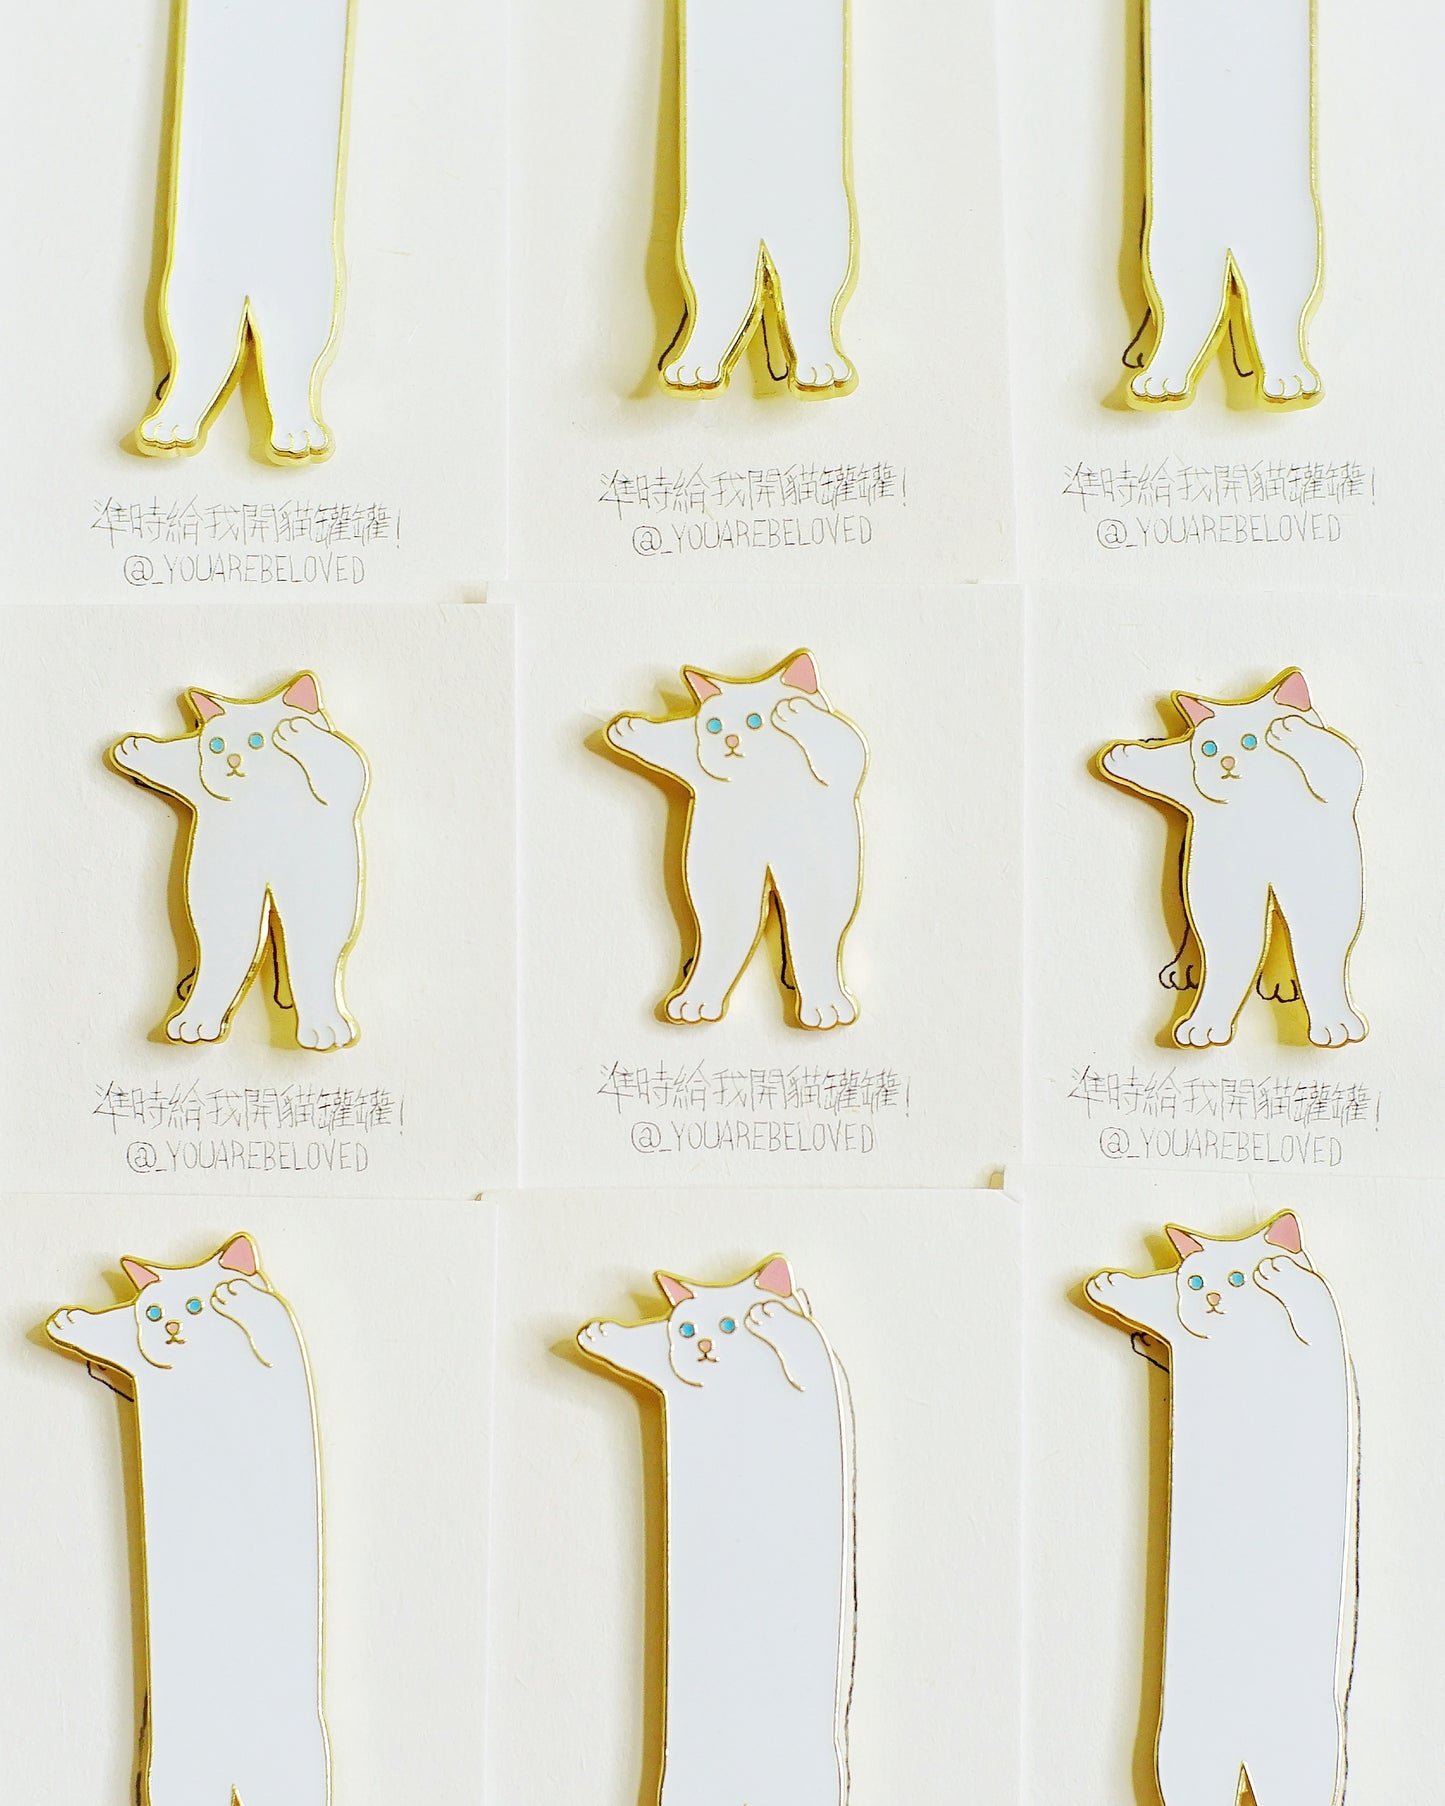 Extended cat meow badge 